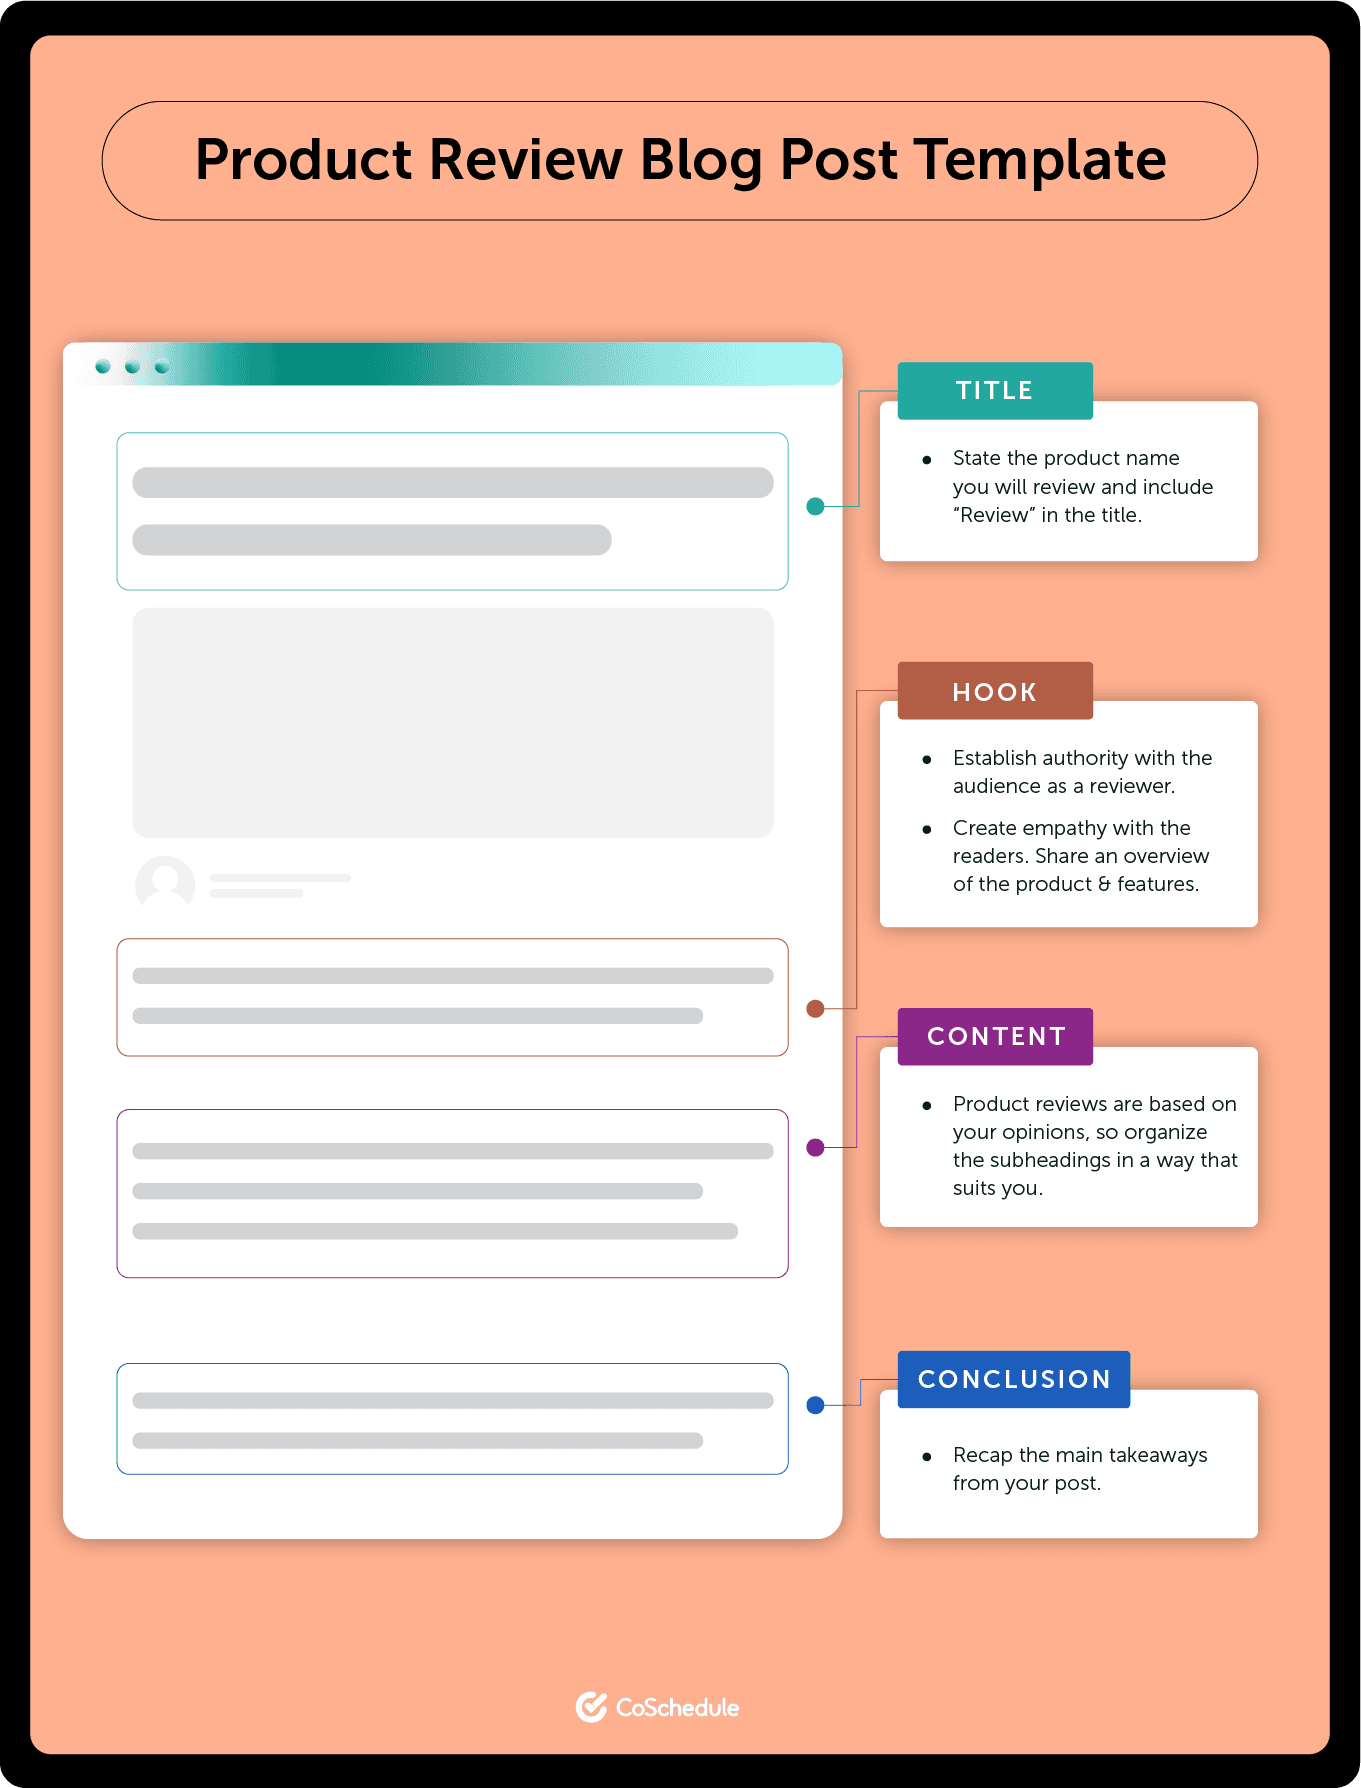 Product review blog post template